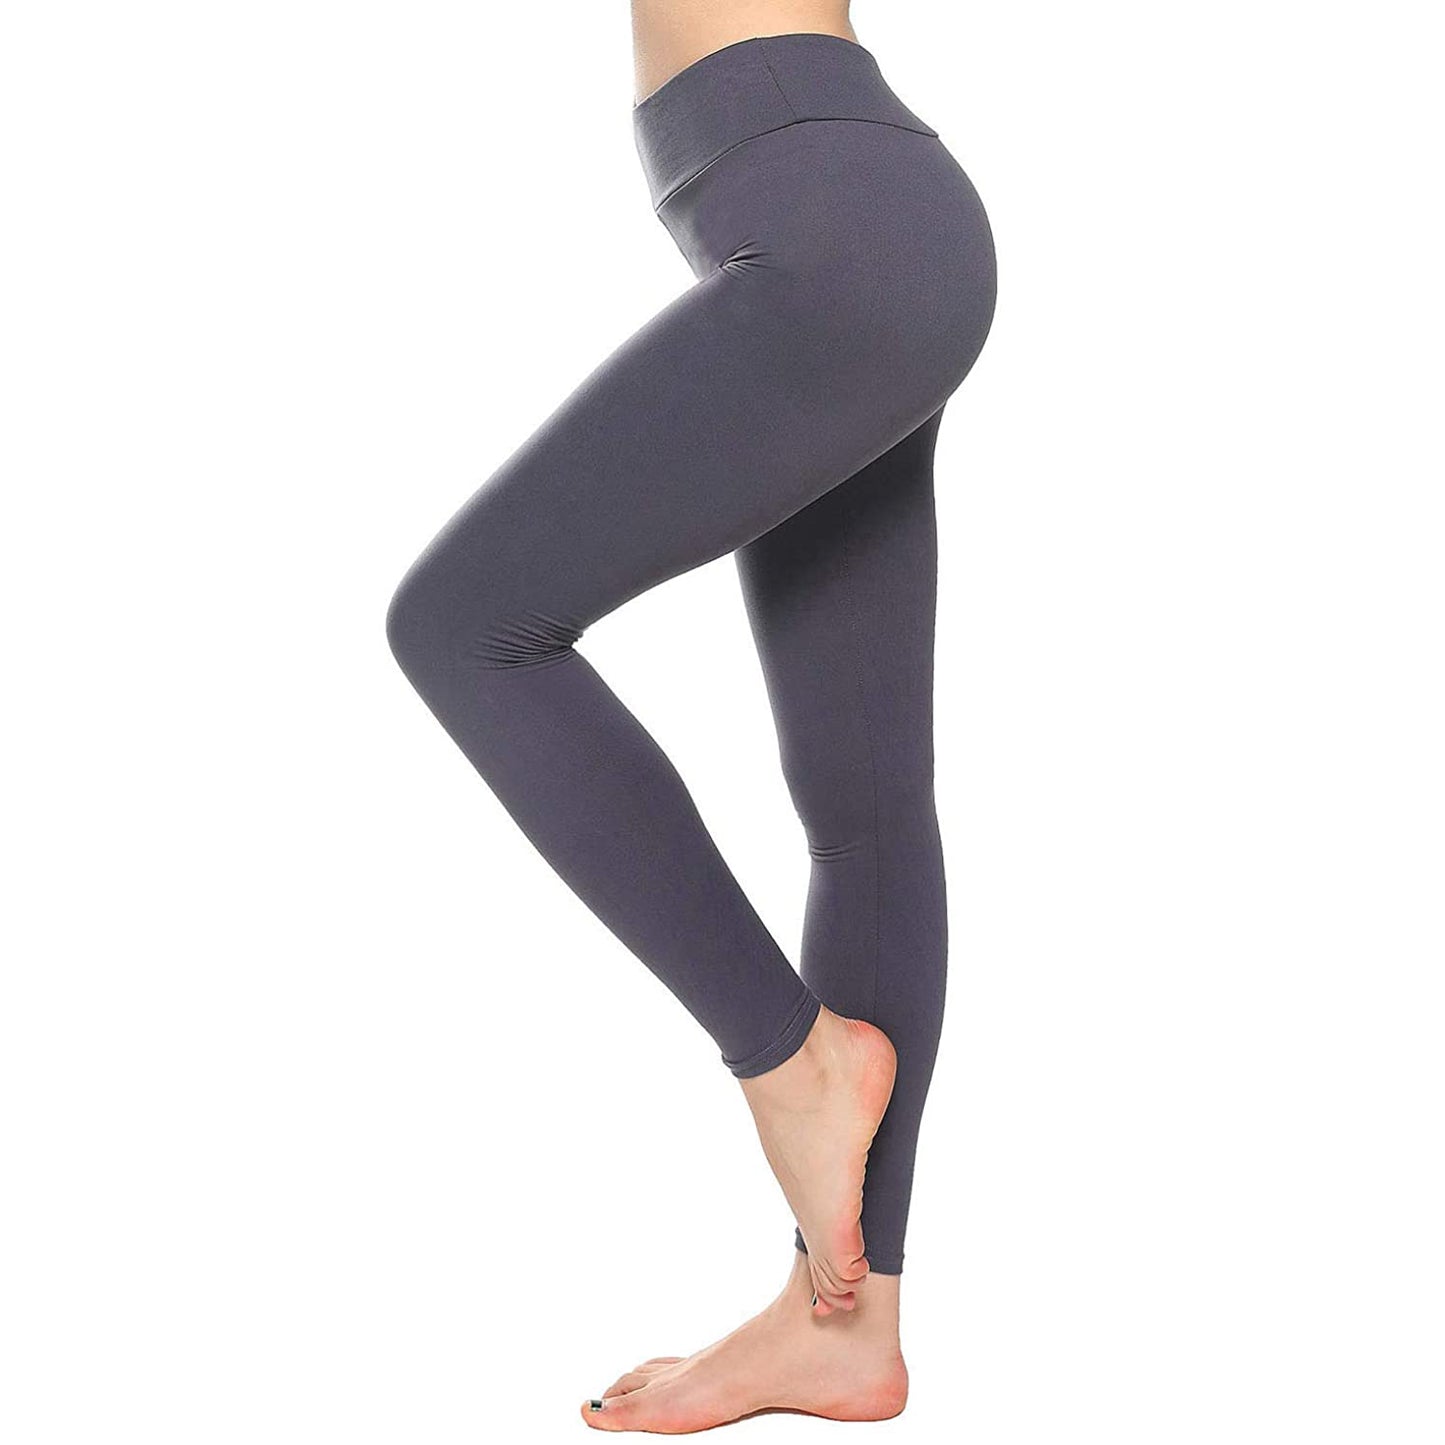 Our Point of View on ZUTY Women's High Wasted Yoga Leggings From